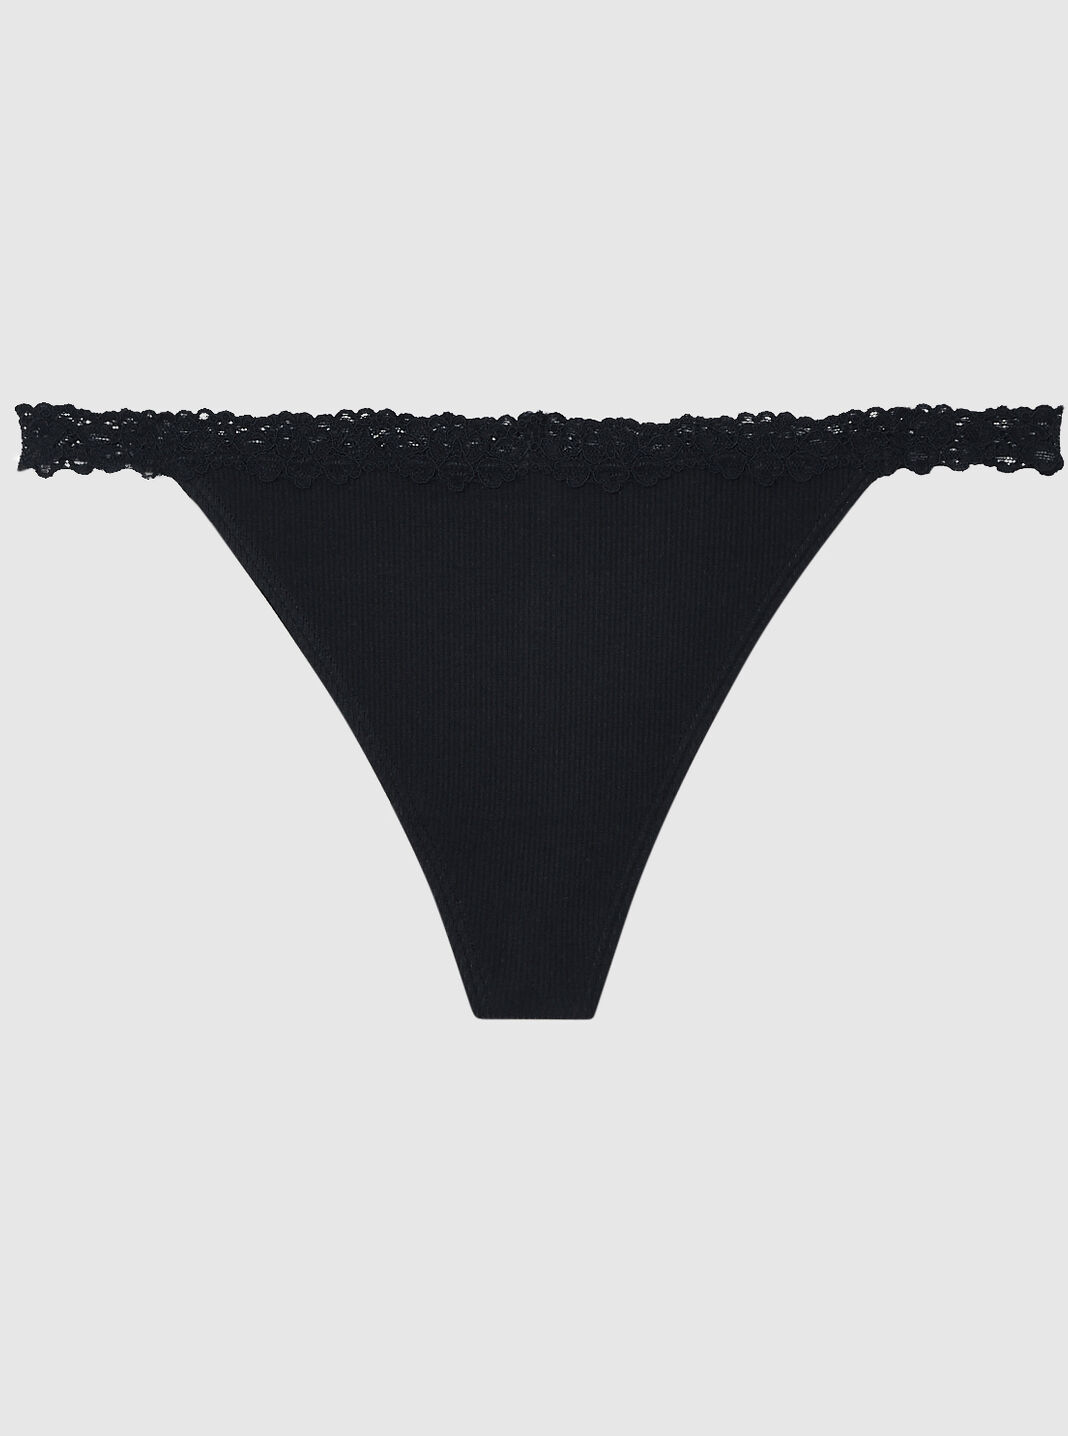 CheapUndies Heather Touch Thong